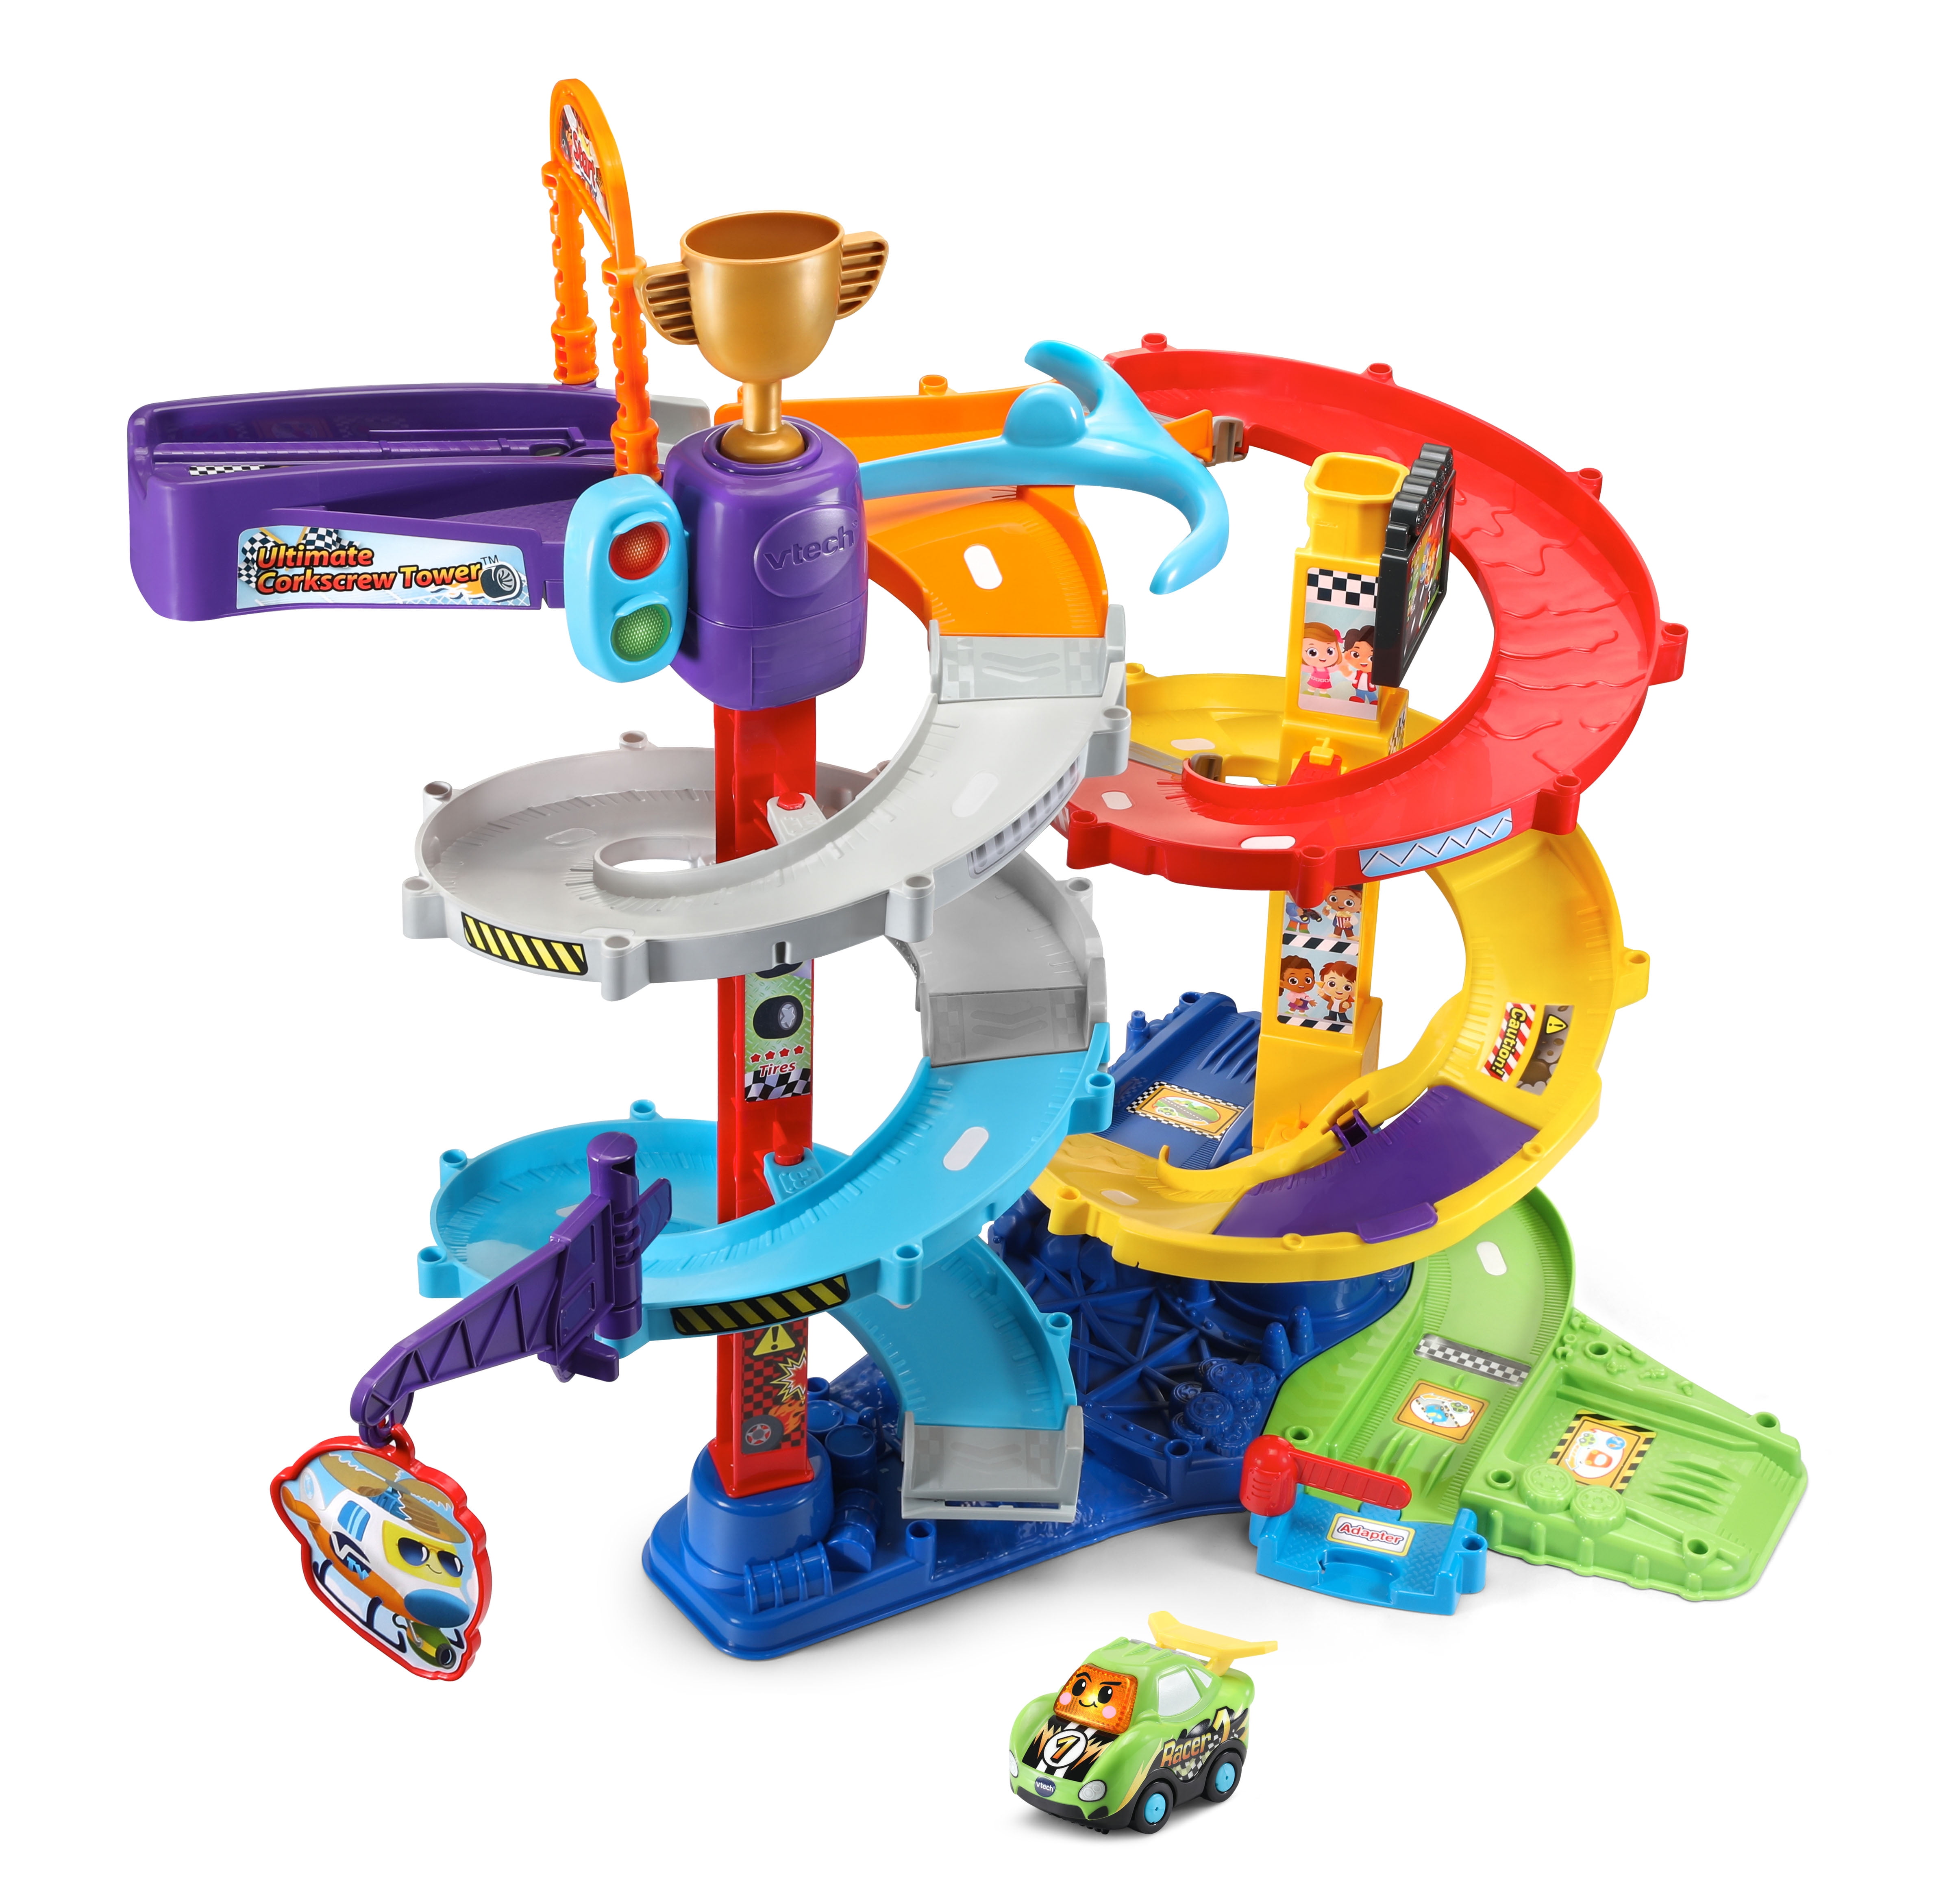 **FREE DELIVERY** 12 + Months VTech Toot Toot Drivers Twist And Race Tower 